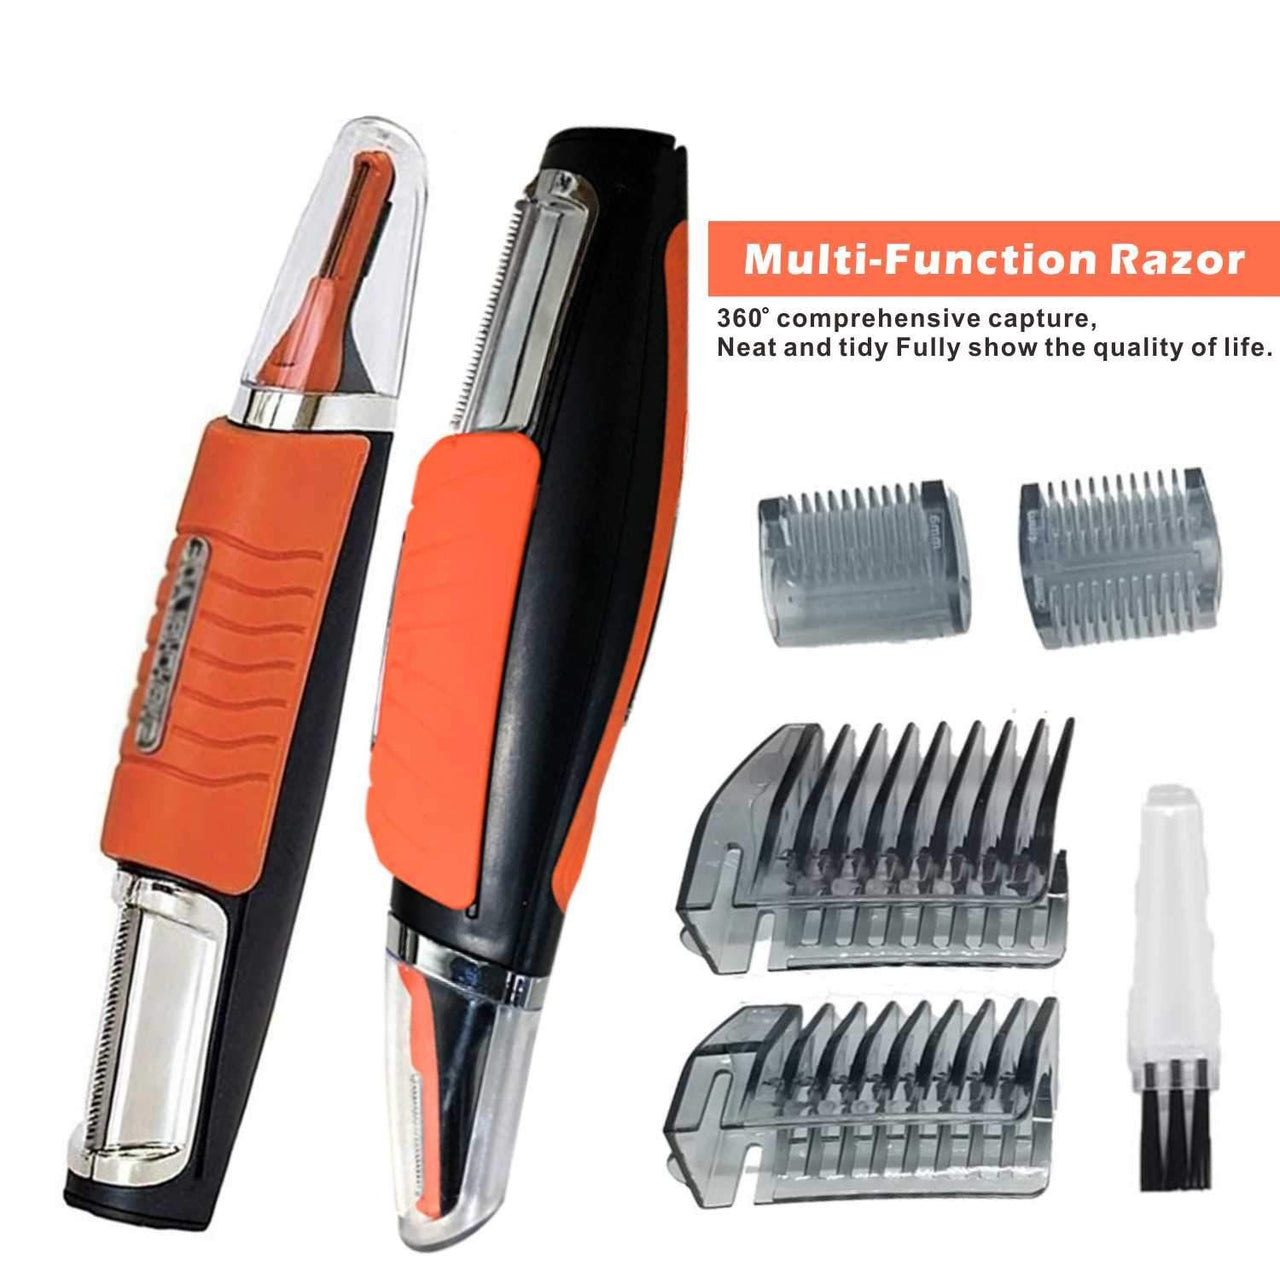 All in One Hair Trimmer - thedealzninja